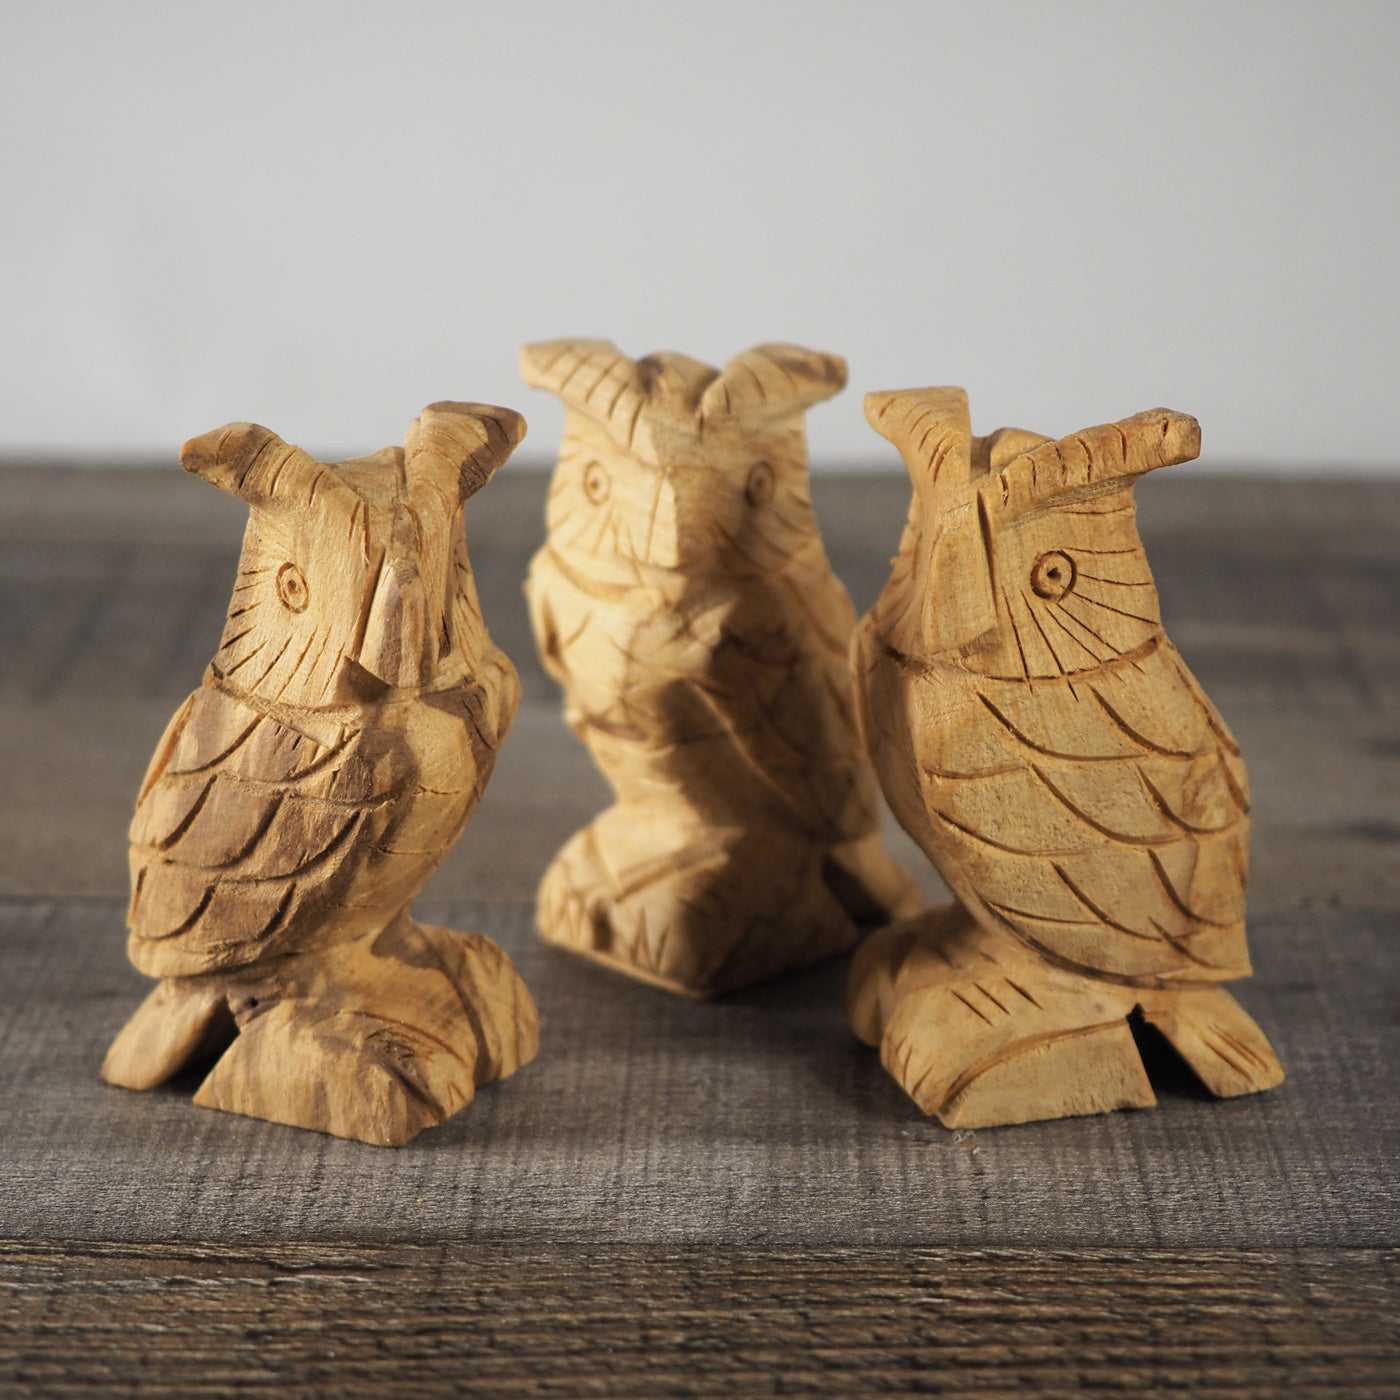 3 little 3" tall hand-carved Palo Santo owls